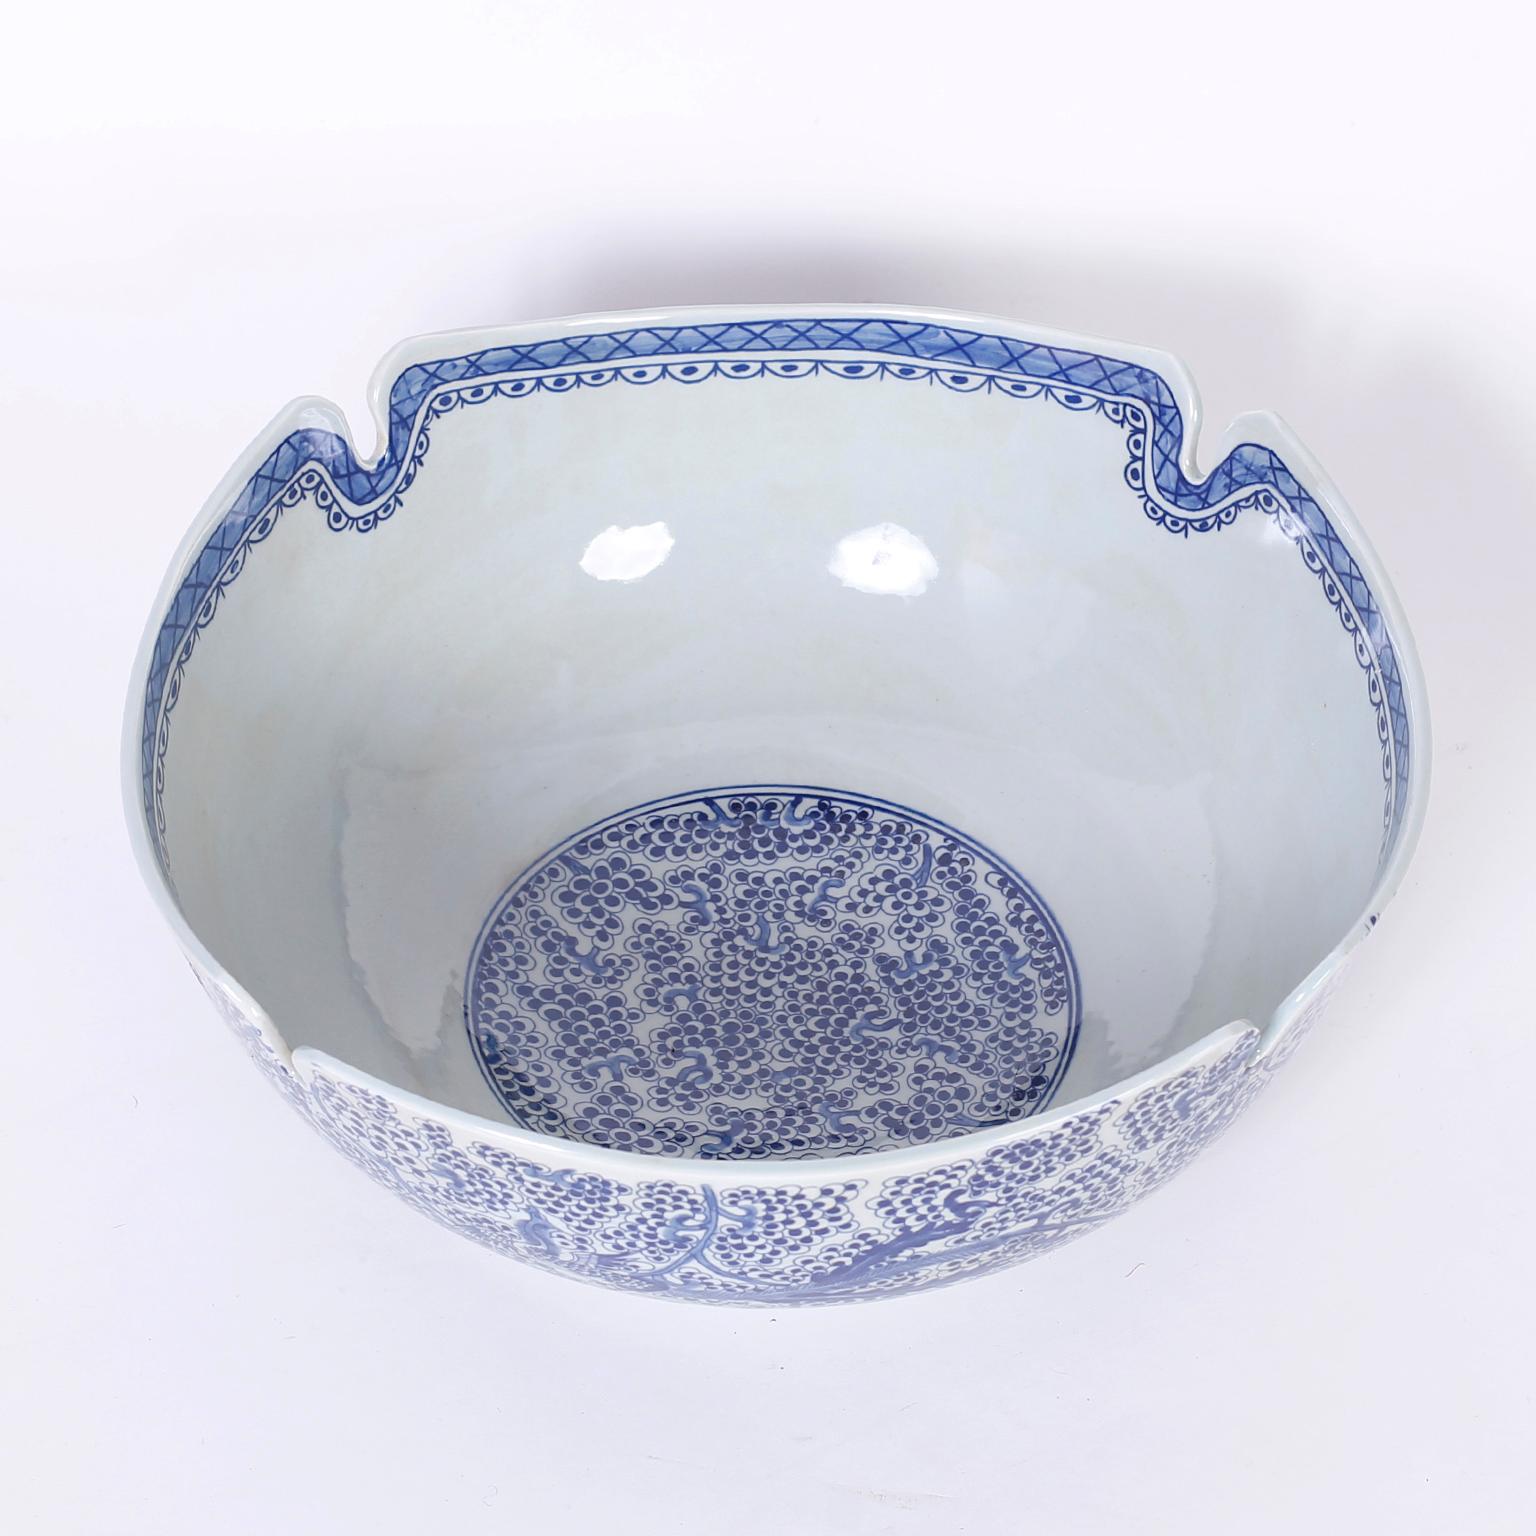 Blue and White Porcelain Fruit Bowl (Chinoiserie)